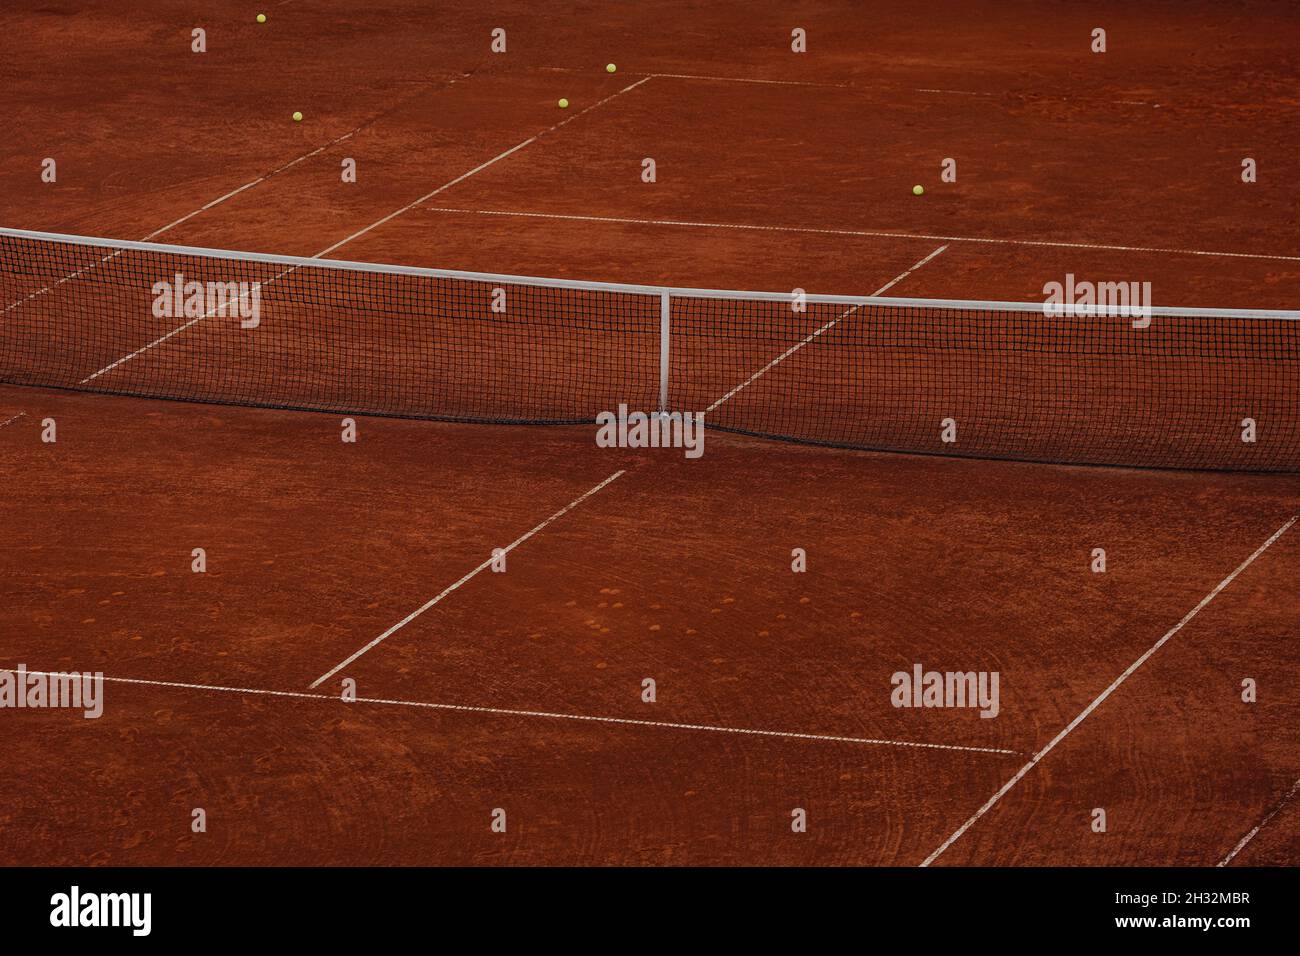 hard tennis court with balls on field Stock Photo